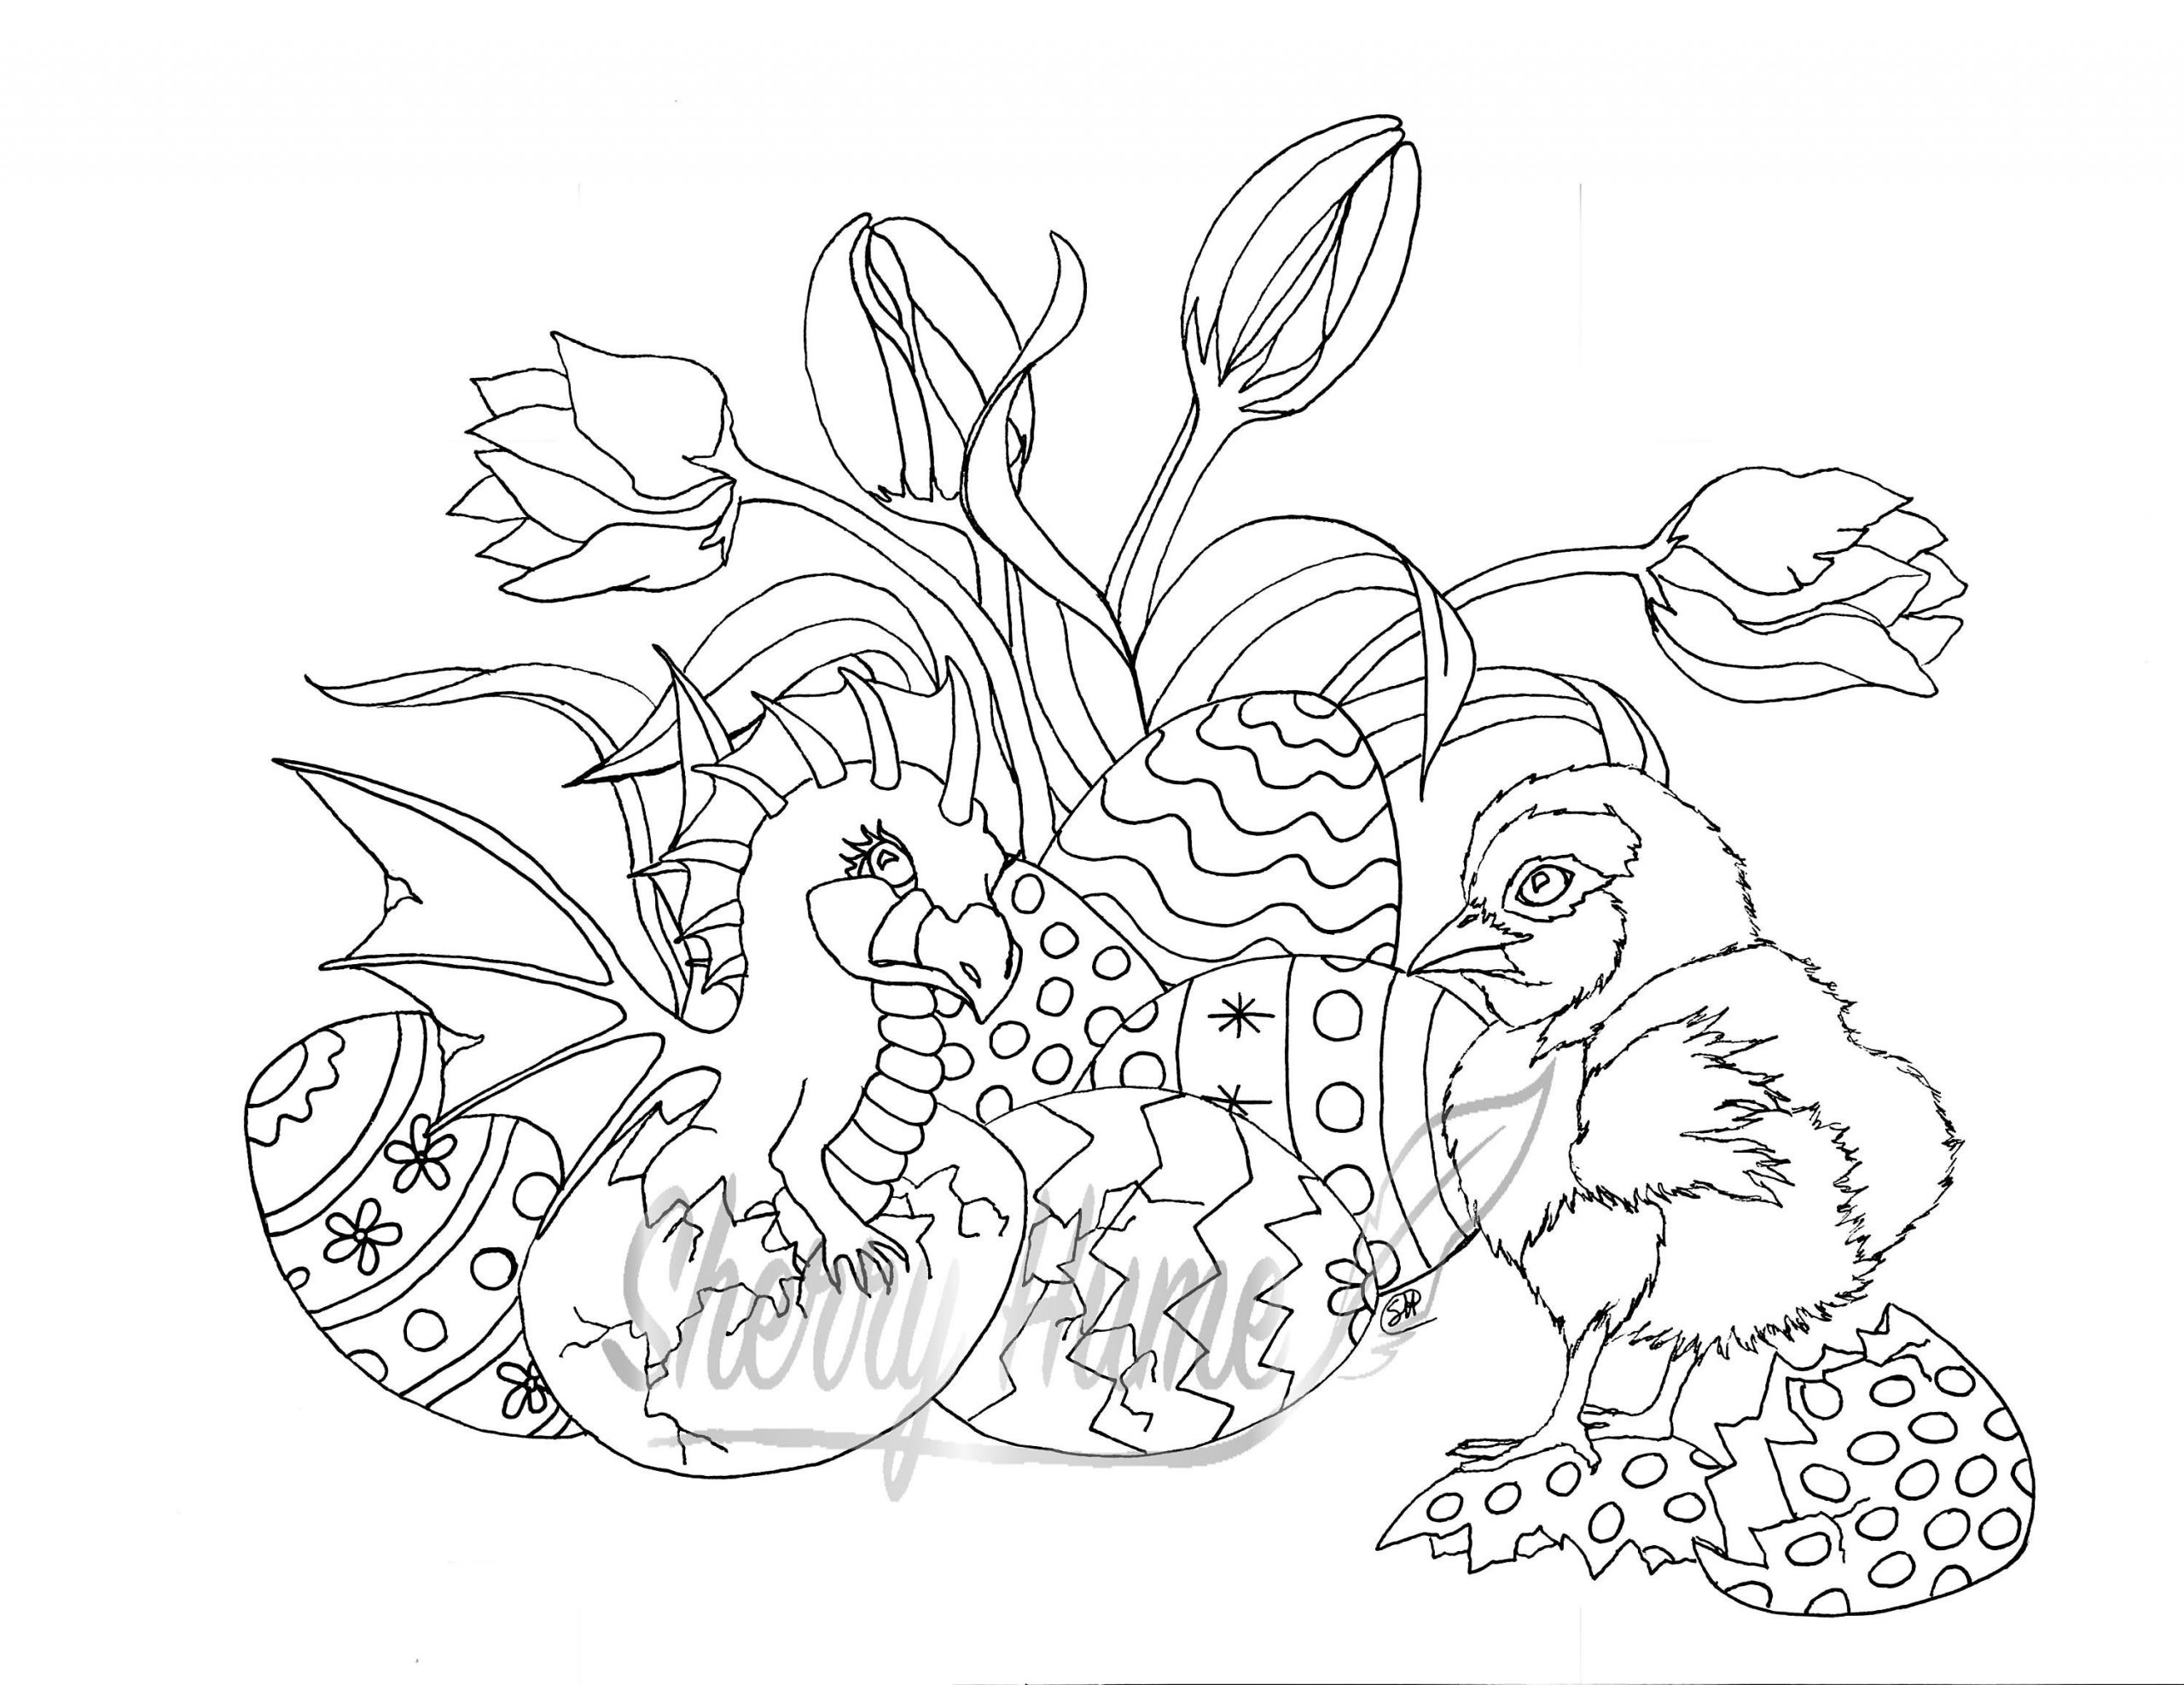 Baby Dragon Coloring Page
 Have fun colouring this cute Baby Dragon and Chick and